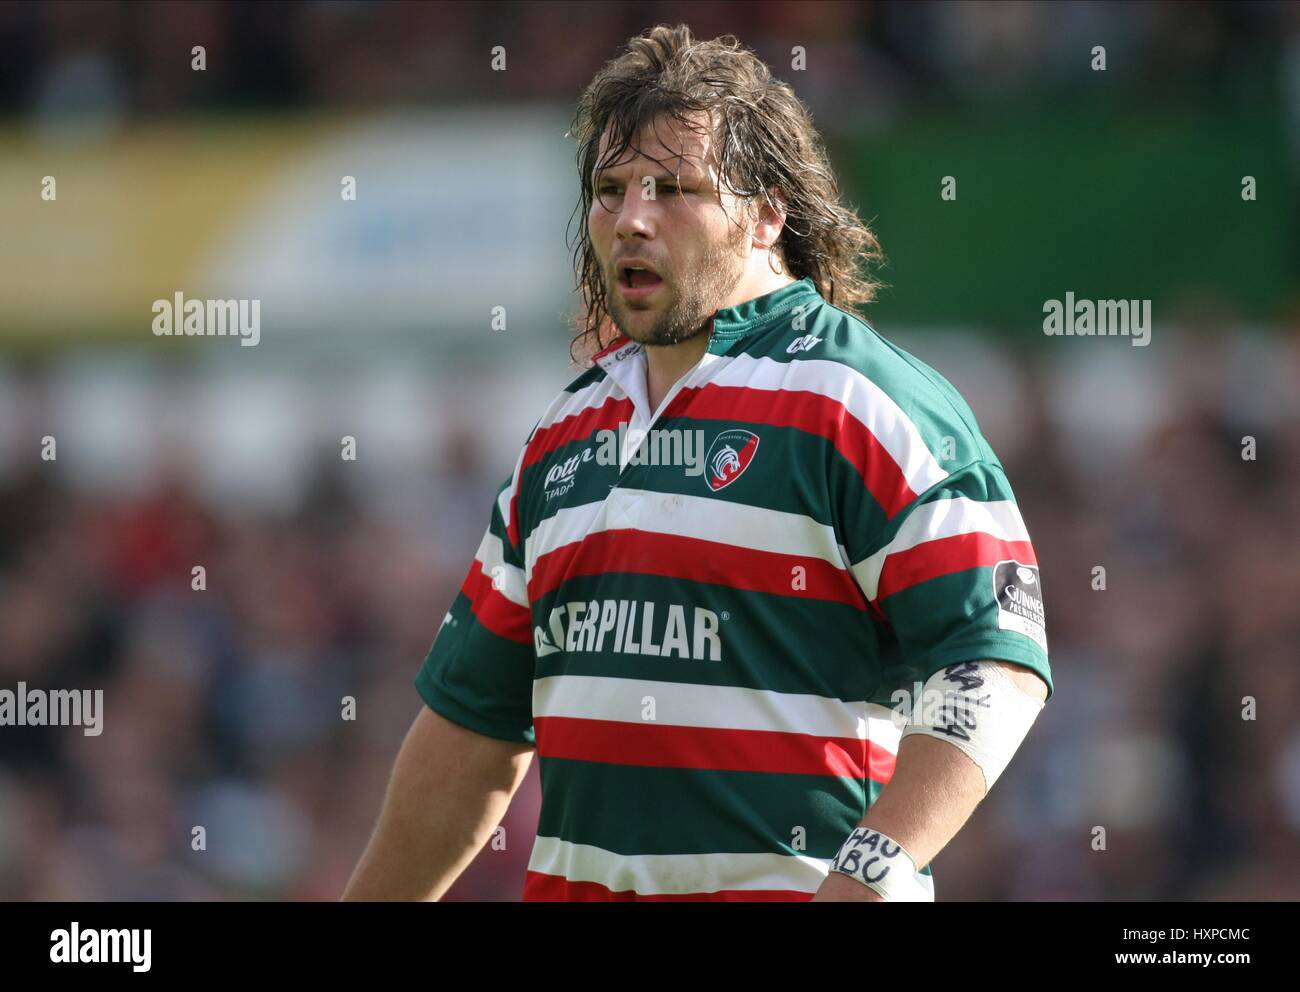 MARTIN CASTROGIOVANNI LEICESTER TIGERS RU WELFORD ROAD LEICESTER ENGLAND 03 October 2009 Stock Photo